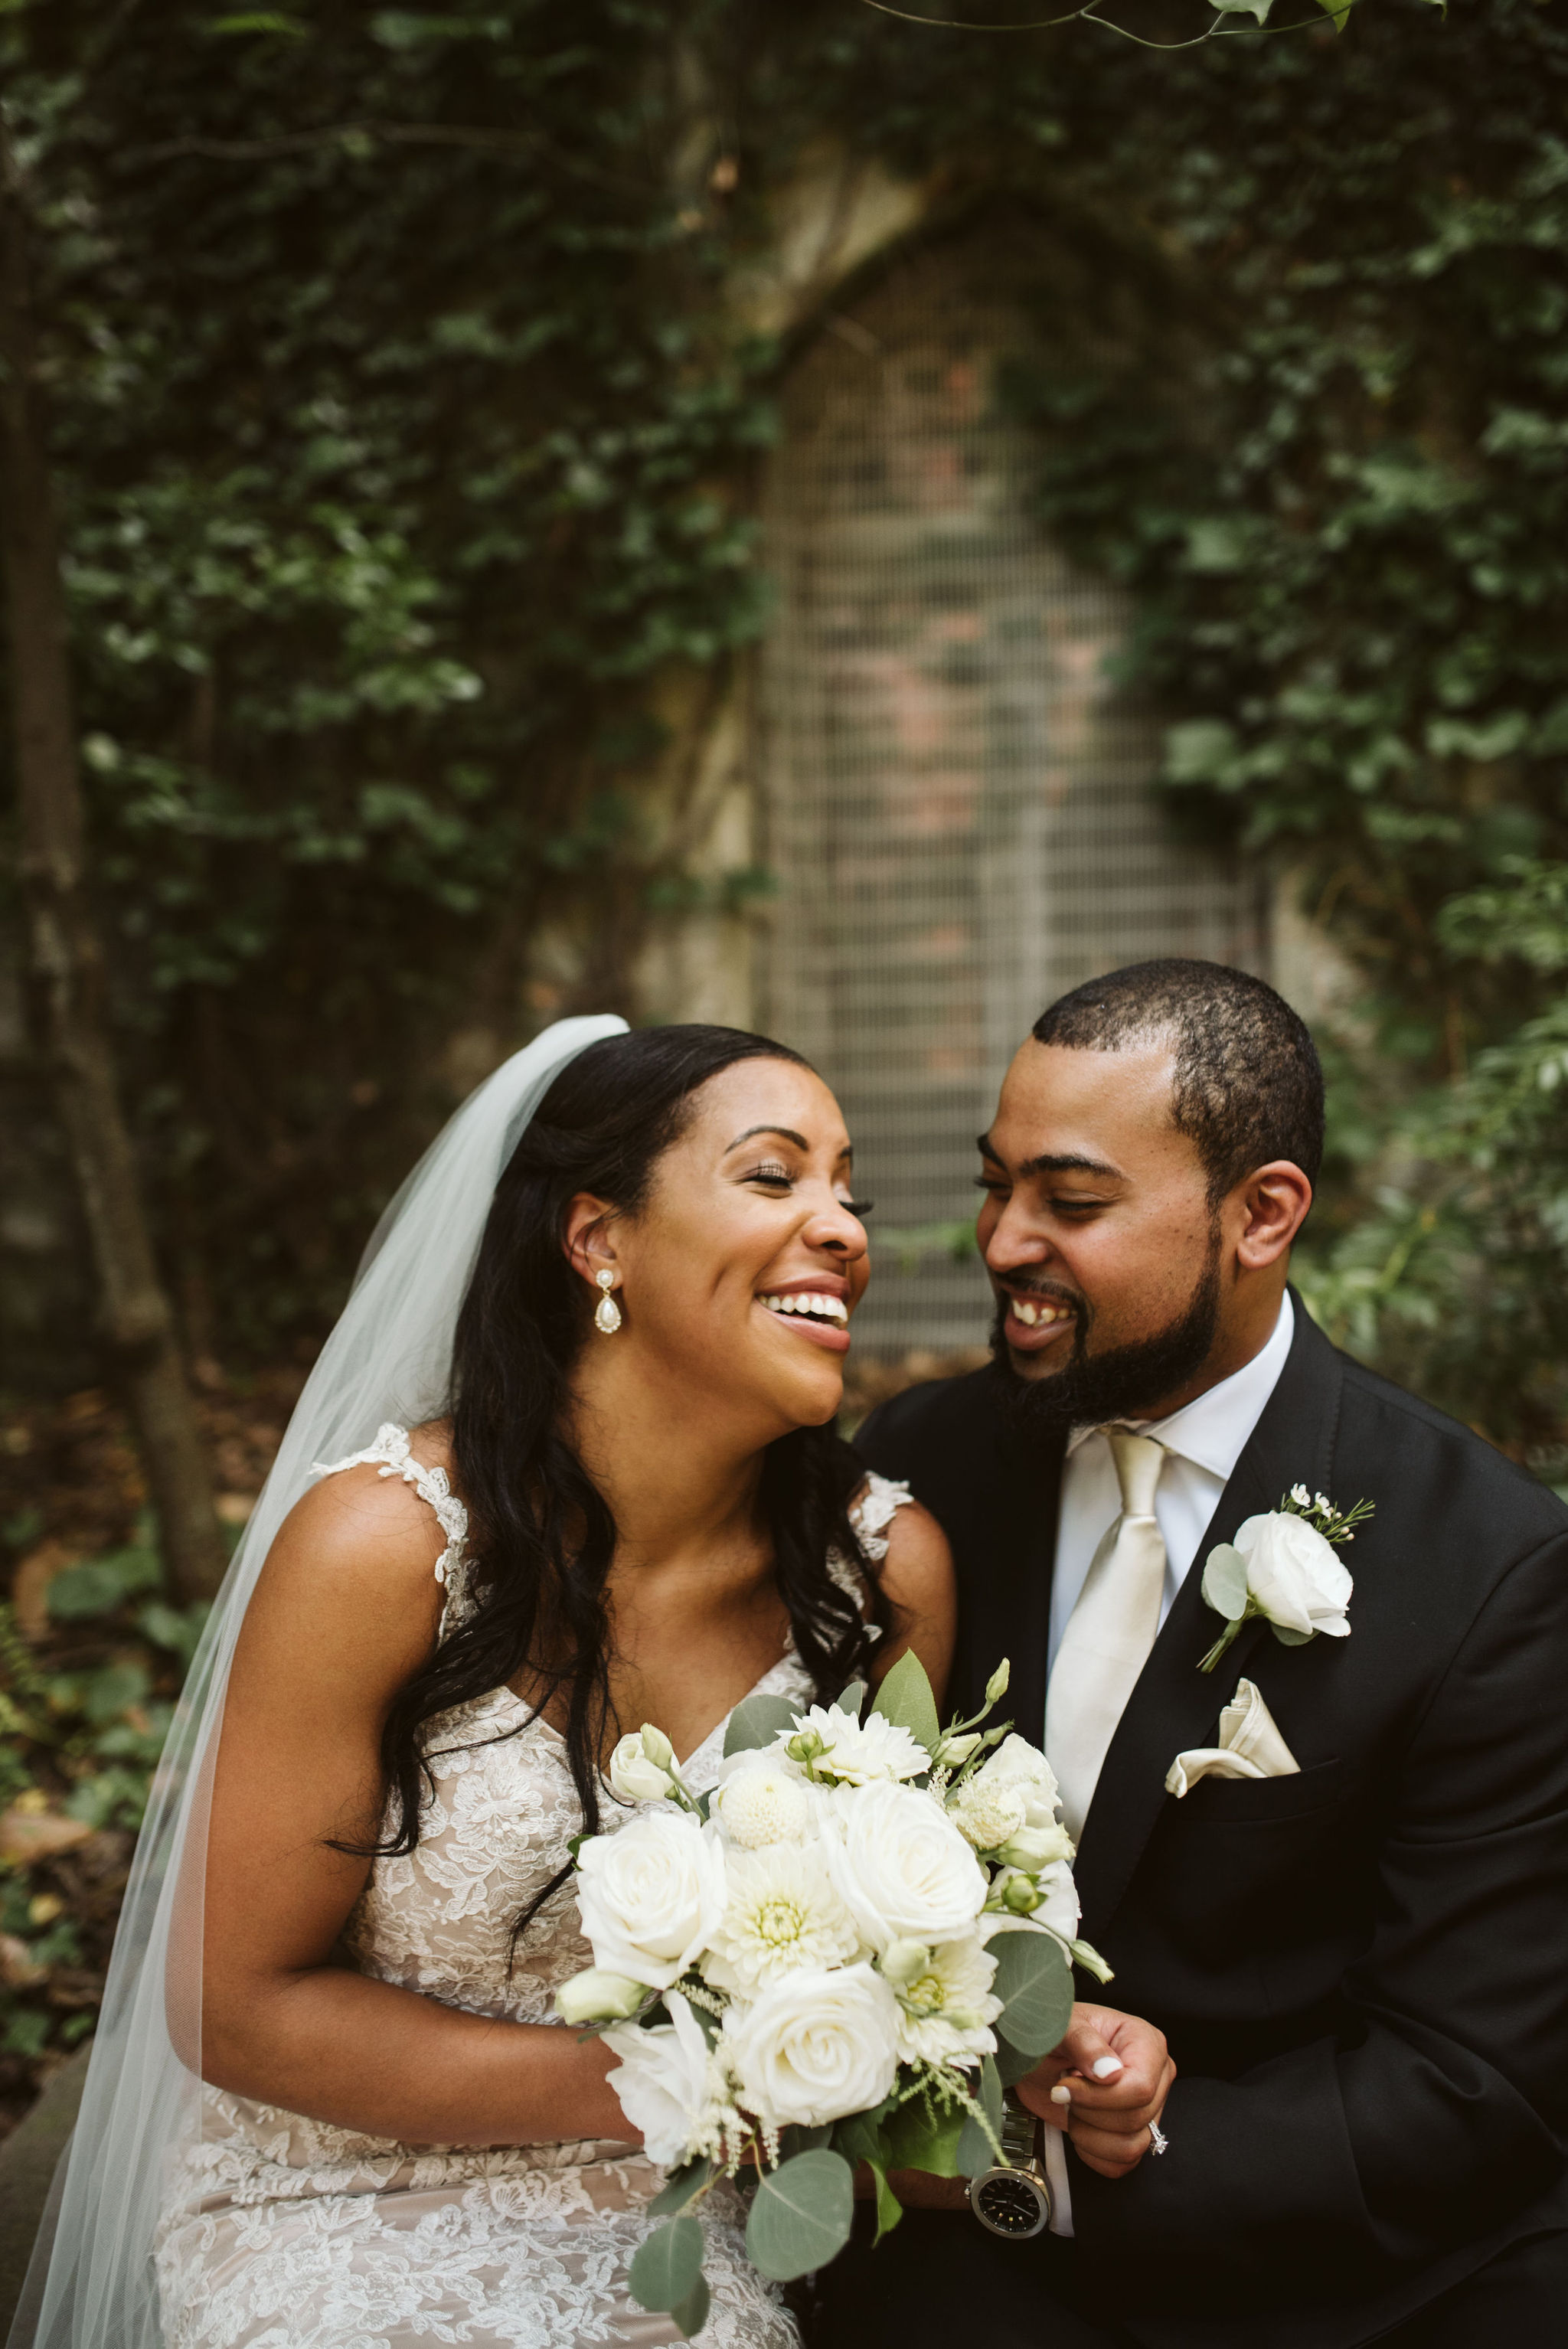  Baltimore, Maryland Wedding Photographer, Mount Vernon, Chase Court, Classic, Outdoor Ceremony, Garden, Romantic, Bride and groom Laughing Together, White Wedding Flowers, Wedding Jewelry 